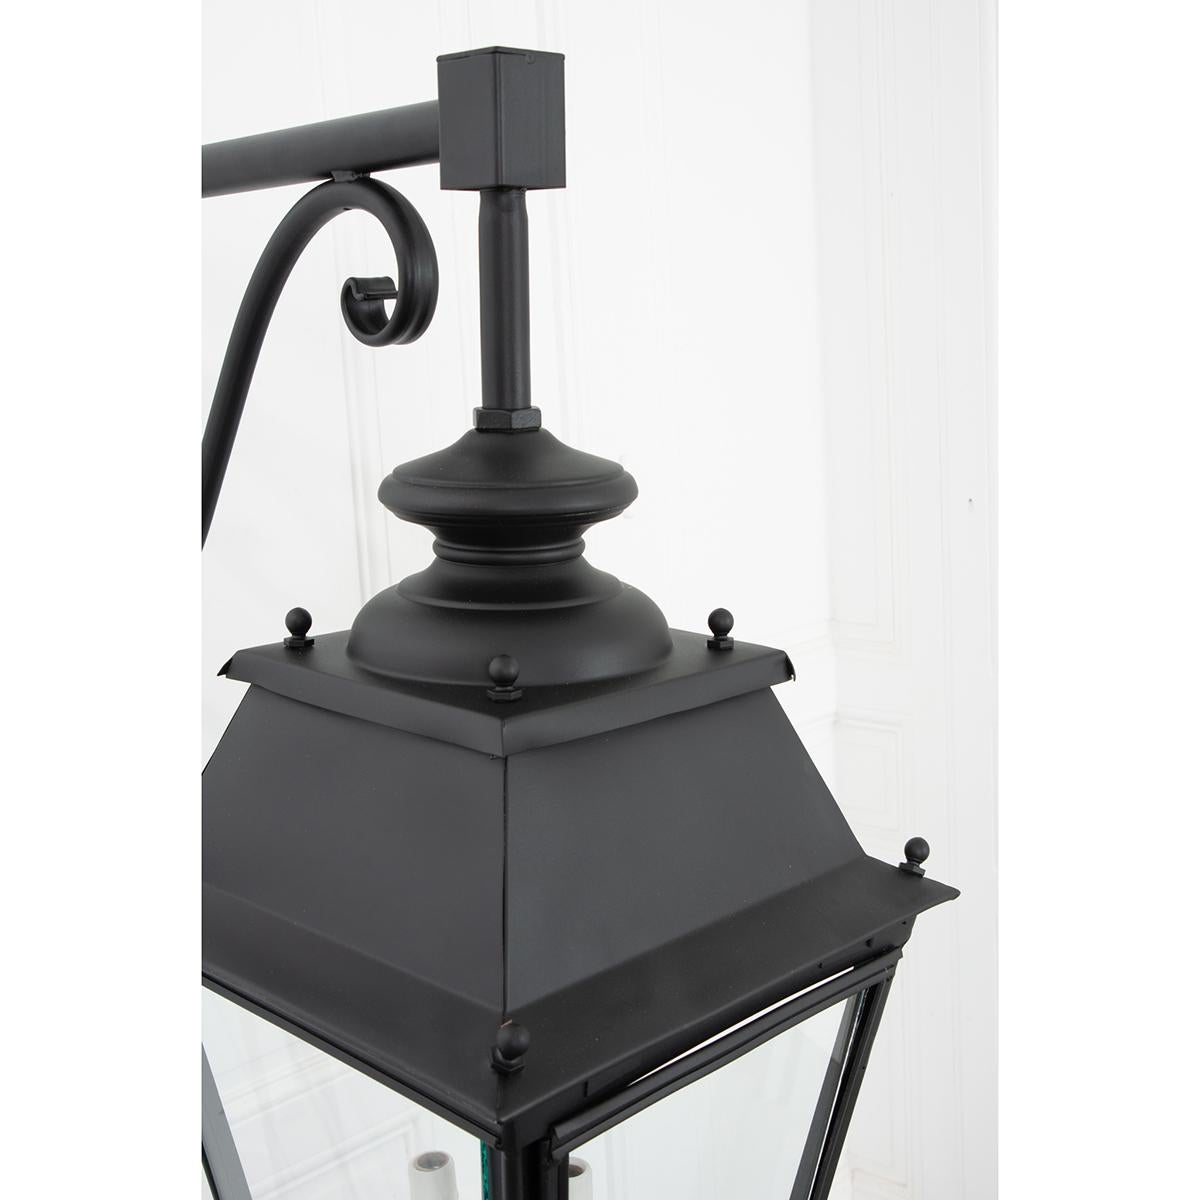 This pair of French vintage lanterns have been cleaned, powder coated and now have a weatherproof flat black finish. They are each suspended by their original decorative bracket. These lanterns have been rewired for US electrical using UL certified